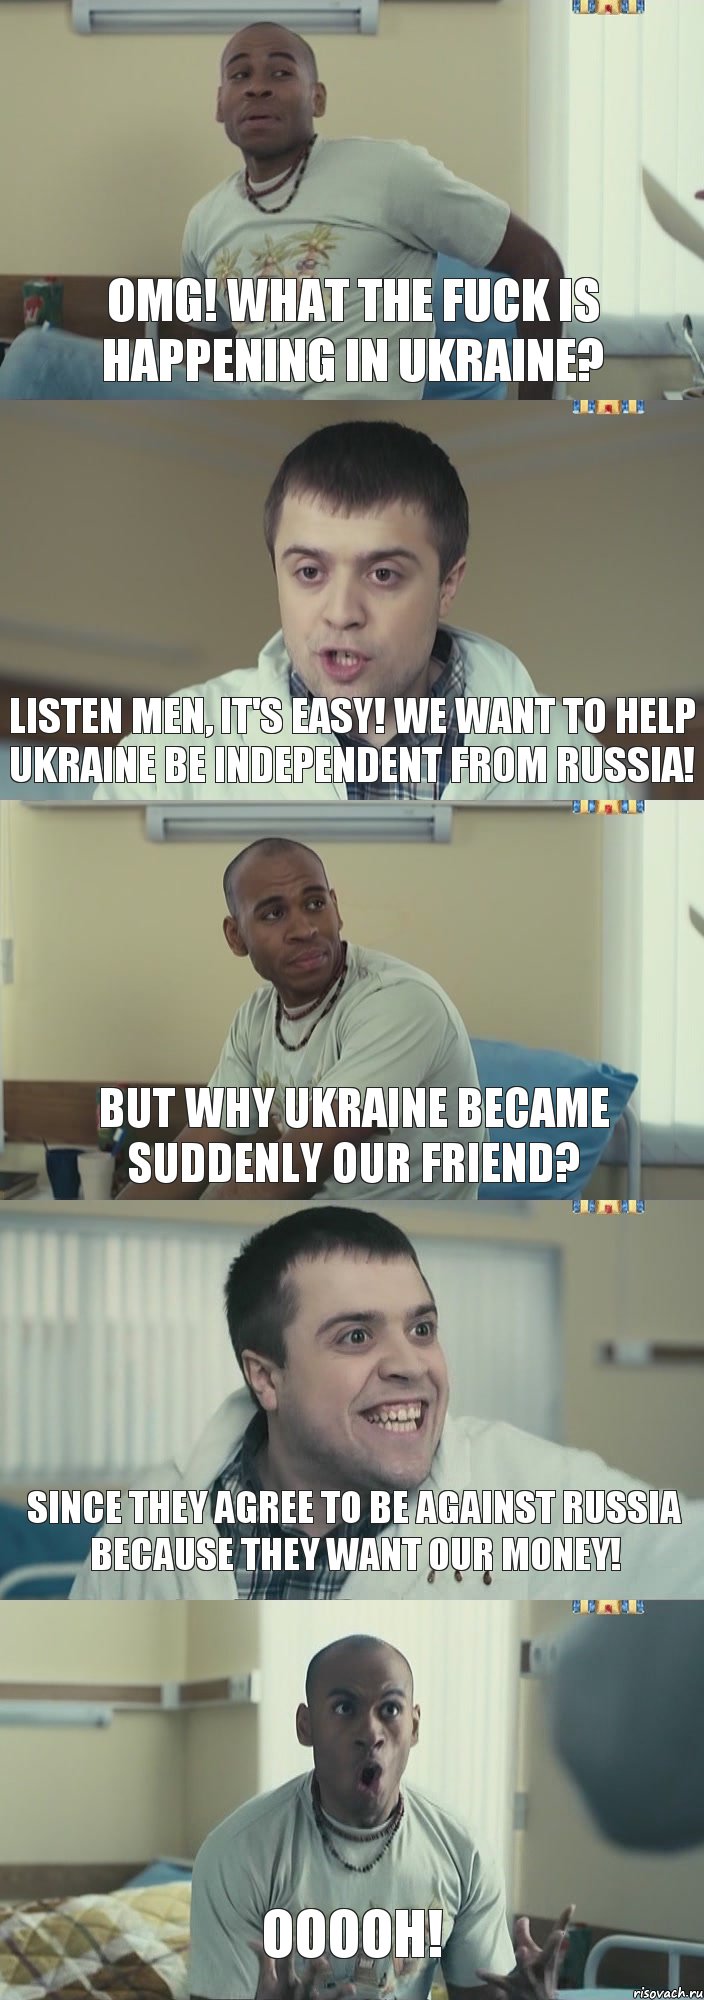 OMG! What the fuck is happening in Ukraine? Listen men, it's easy! We want to help Ukraine be independent from Russia! But why Ukraine became suddenly our friend? Since they agree to be against Russia because they want our money! Ooooh!, Комикс Интерны